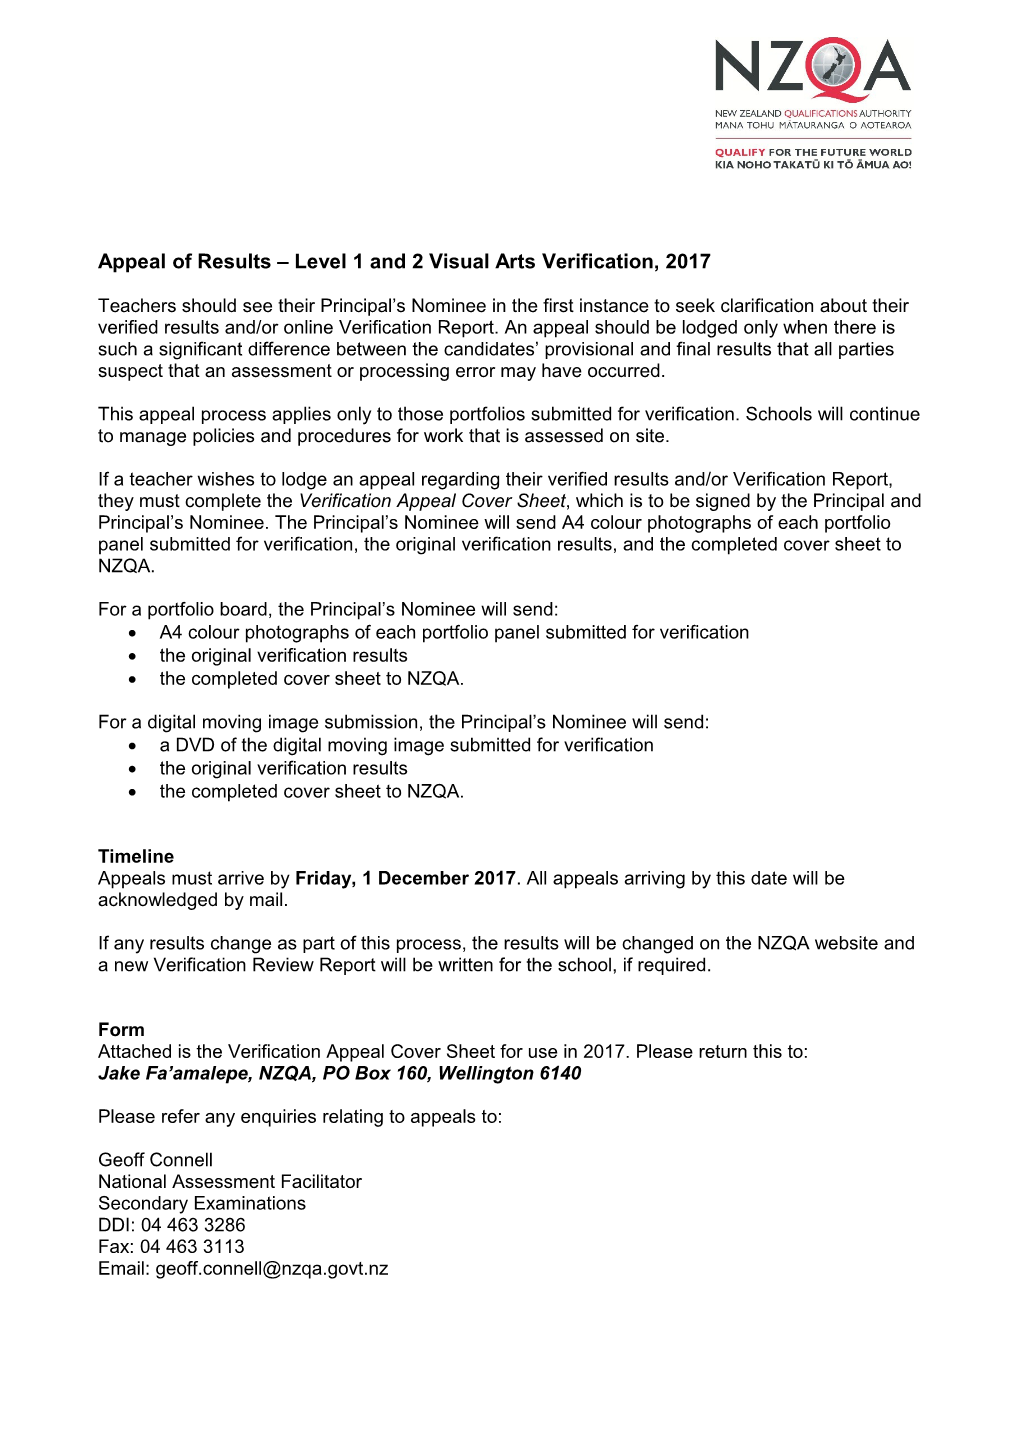 Appeal of Results Level 1 and 2 Visual Arts Verification, 2017